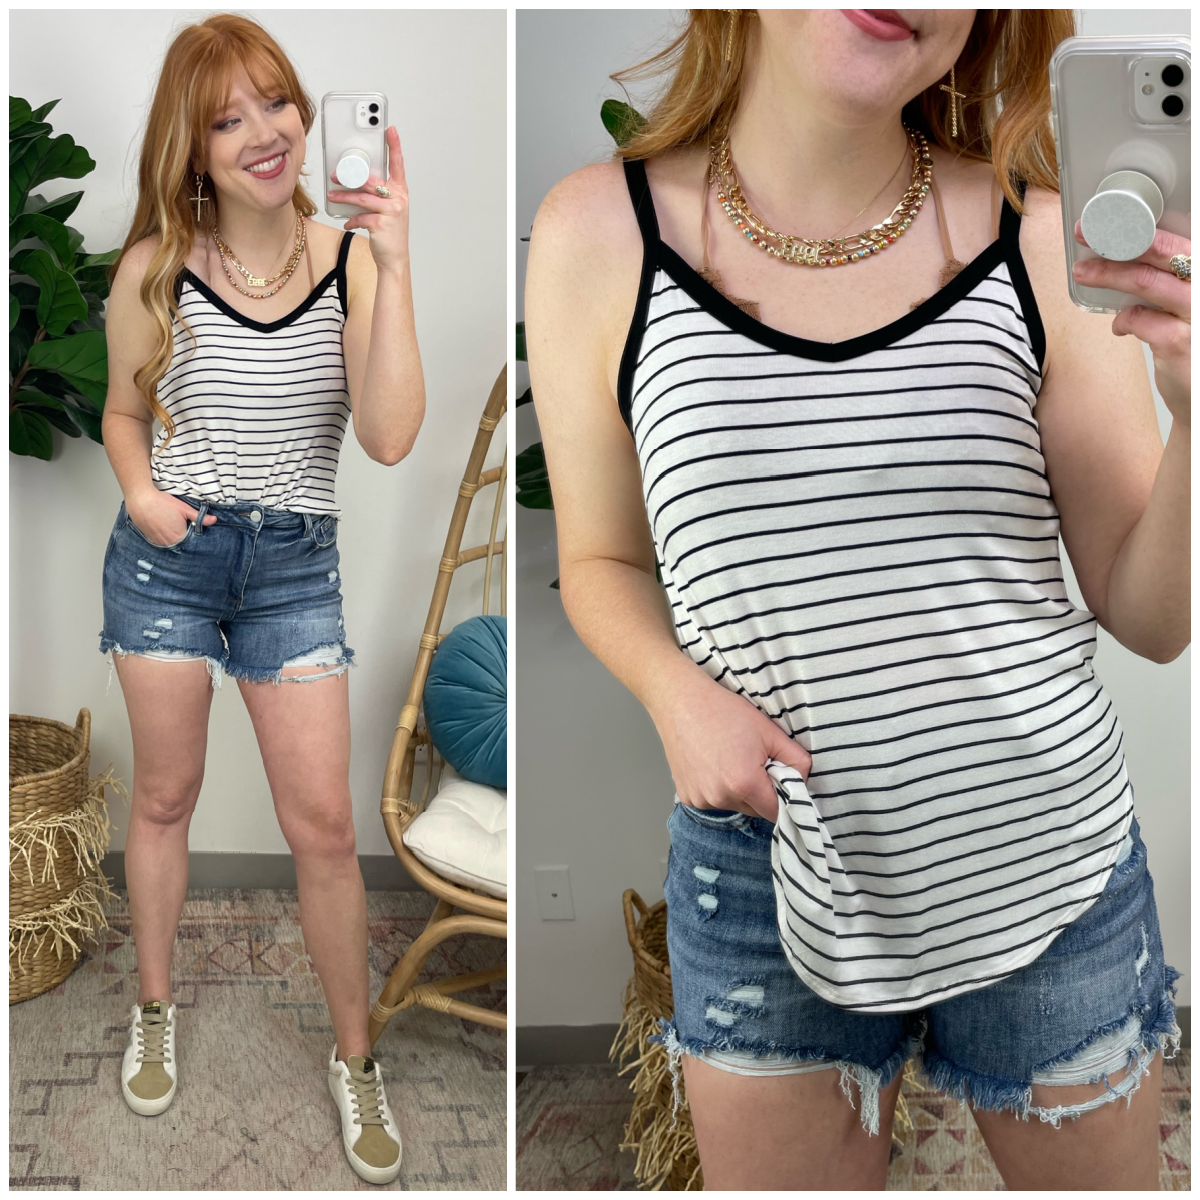  Annesleigh V-Neck Striped Tank Top - Madison and Mallory